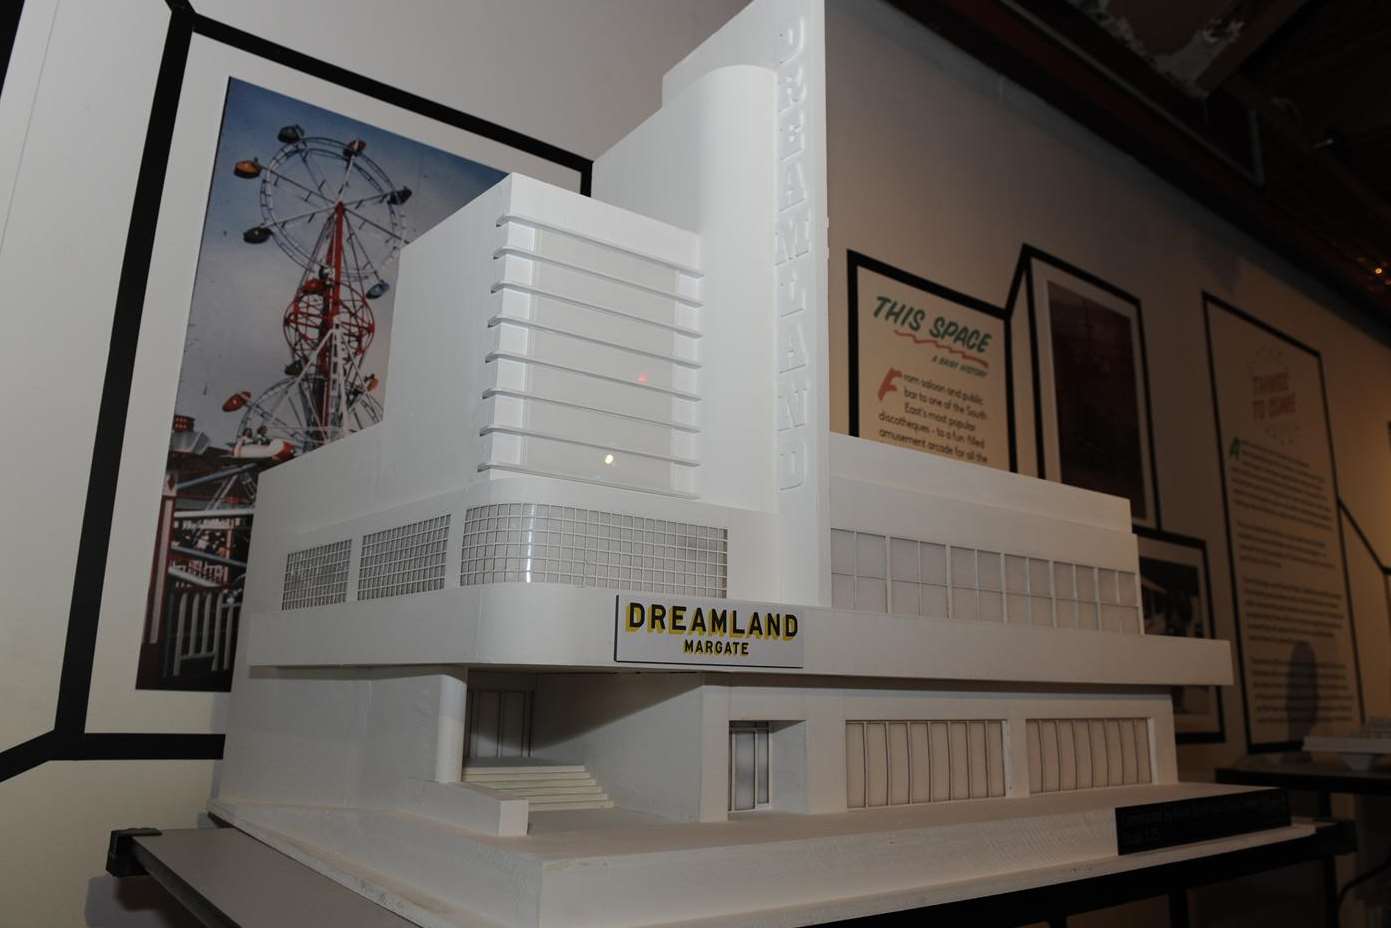 A scale model of the re-built Dreamland site